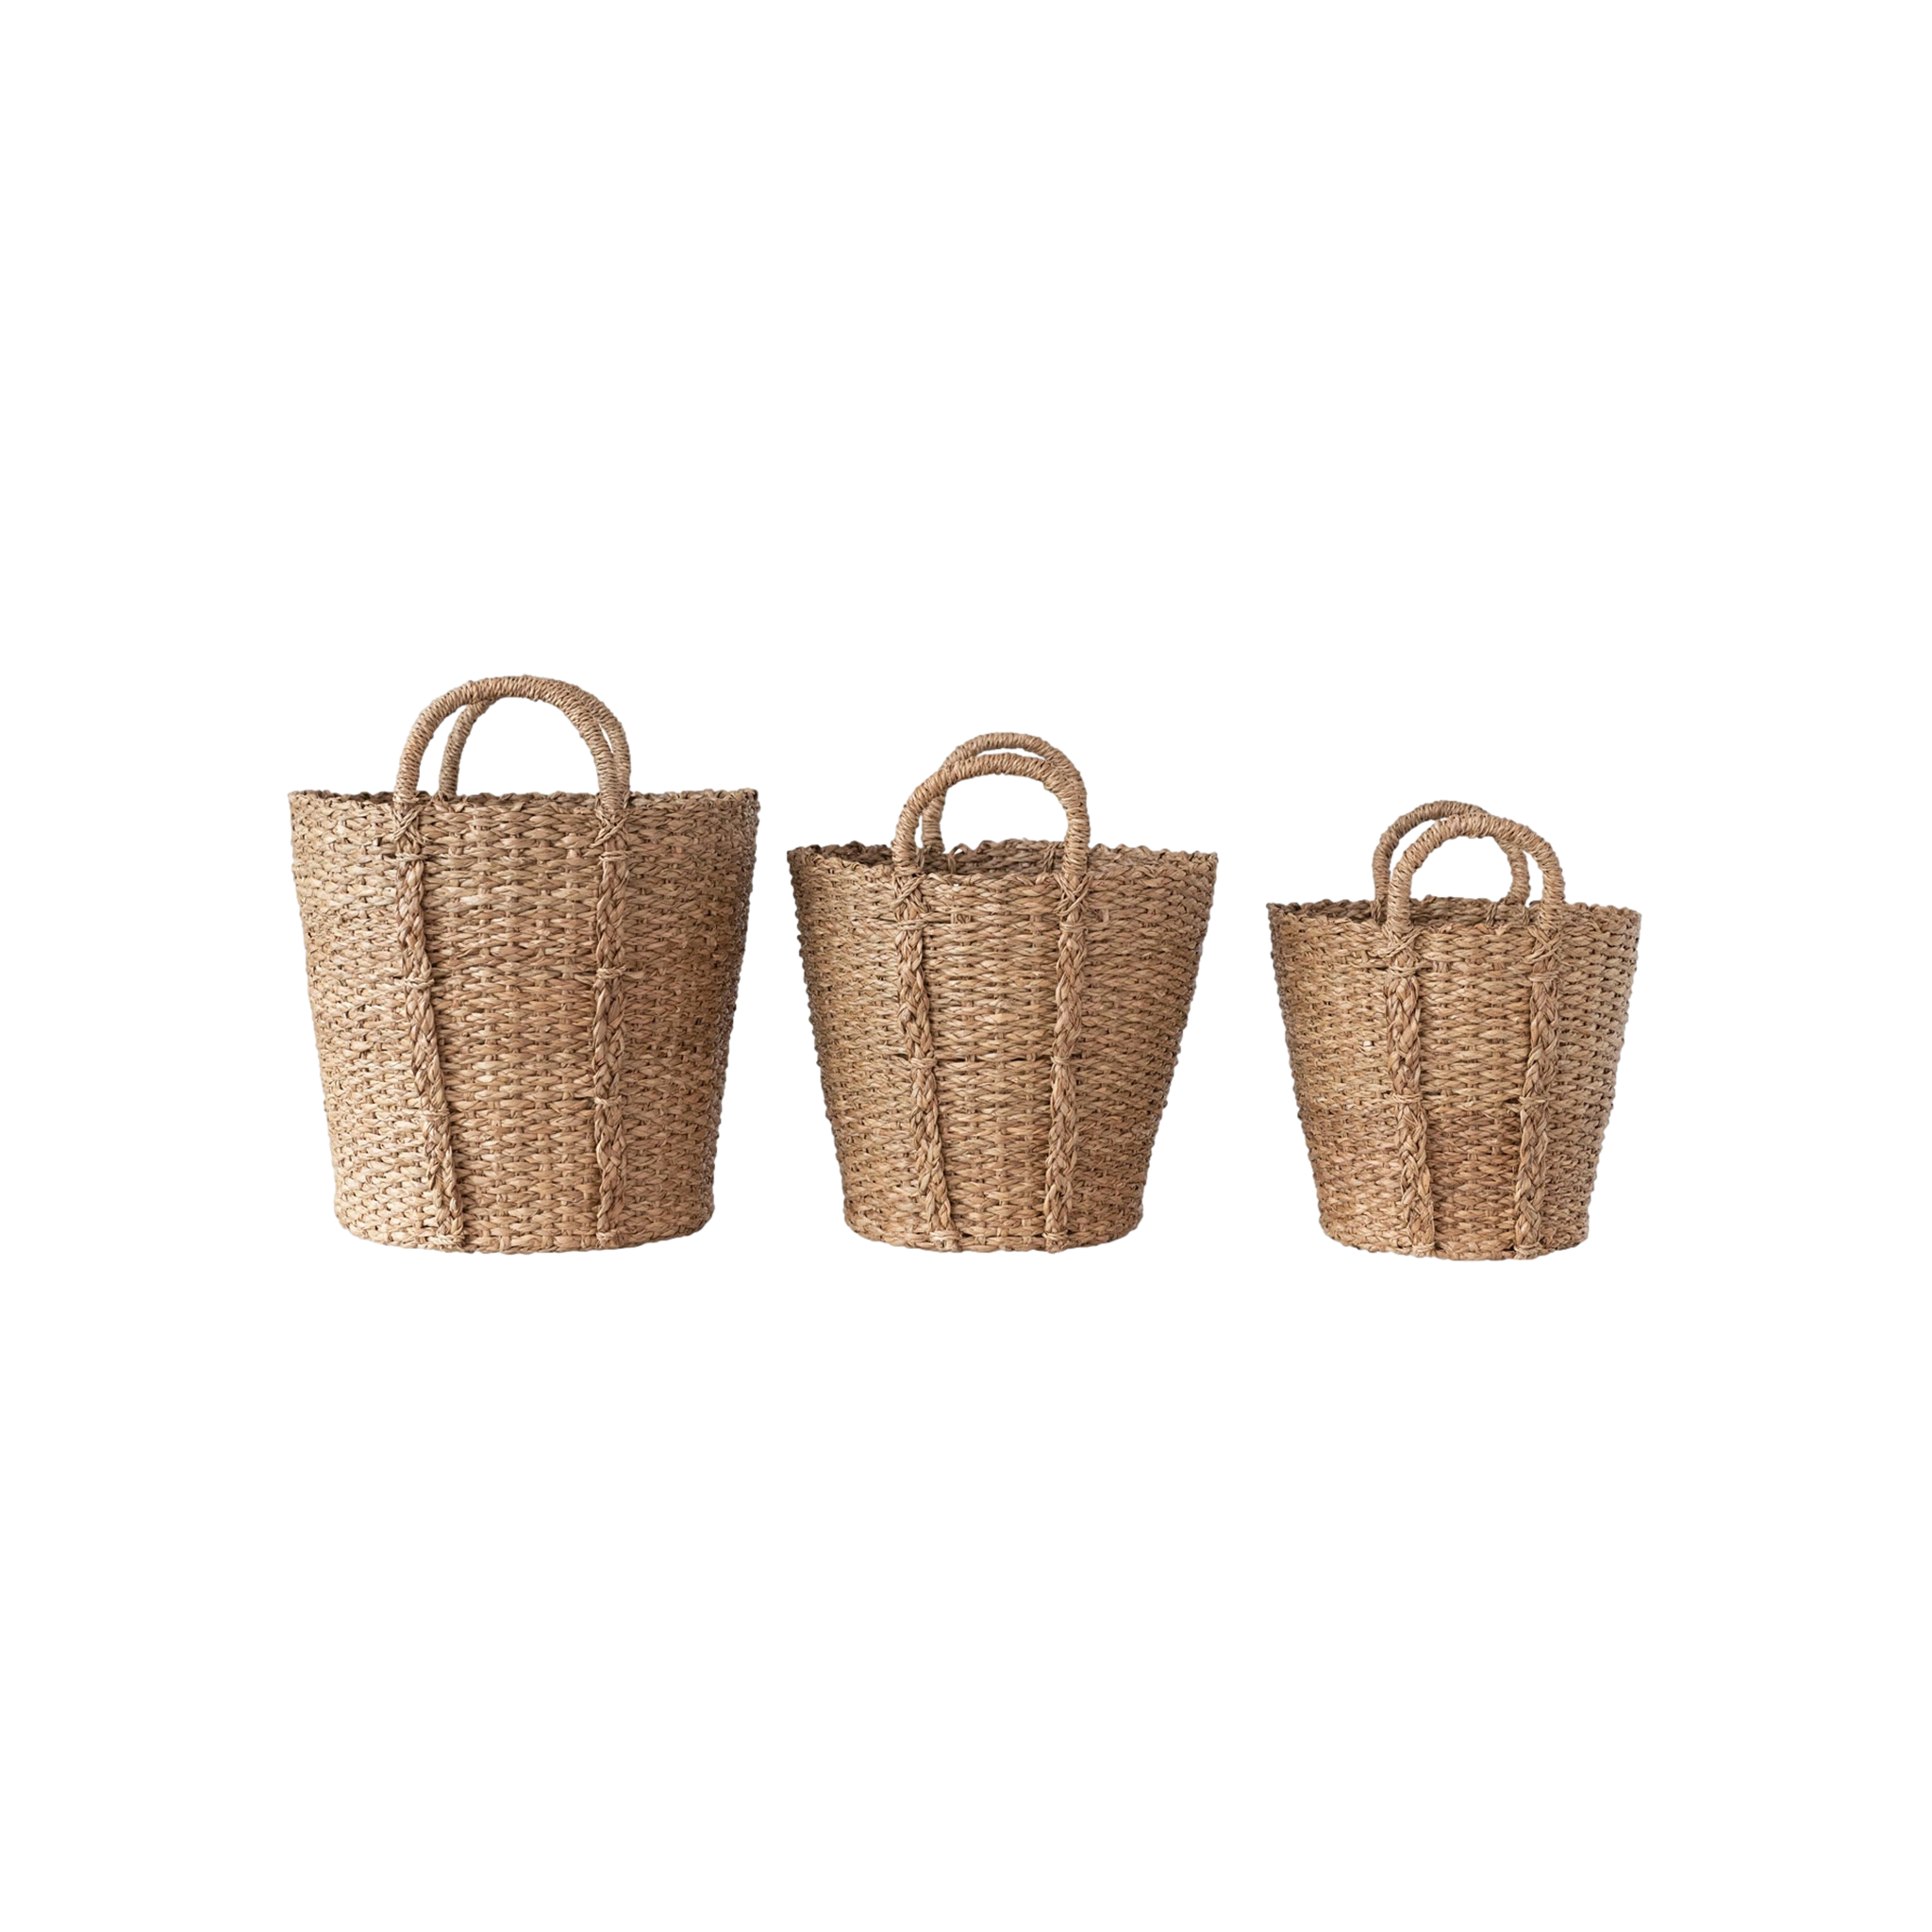 Hand-Woven Bankuan Baskets with Braided Handles (Set of 3)